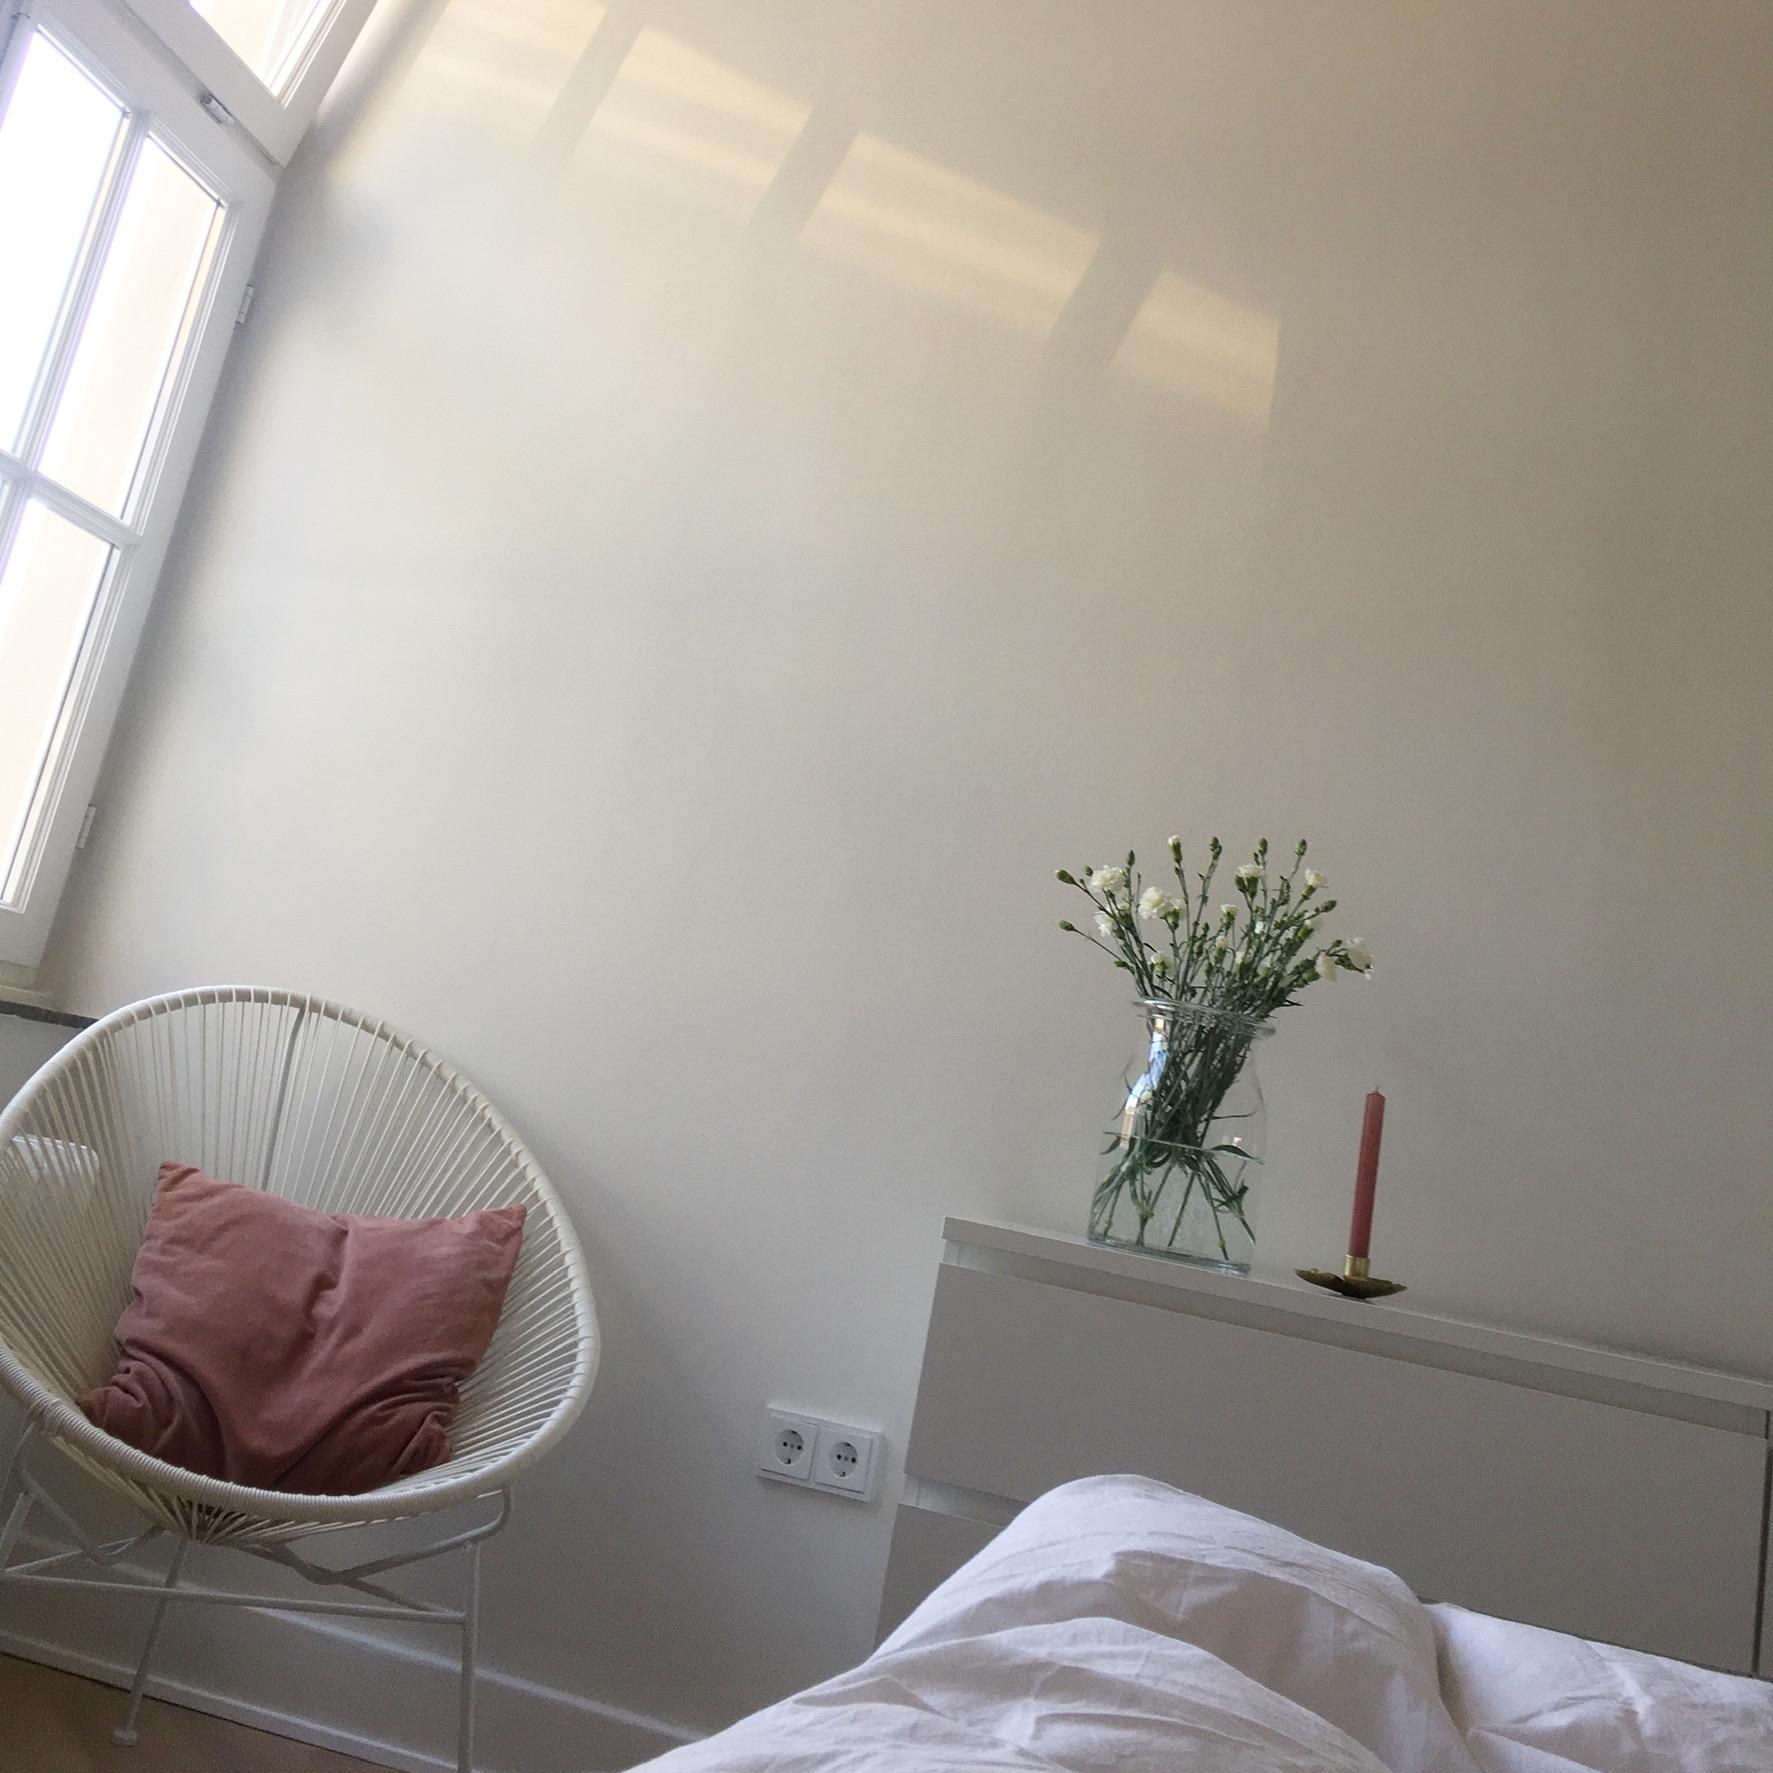 waking up to this every morning now #altbau #altbauliebe #schlafzimmerliebe 